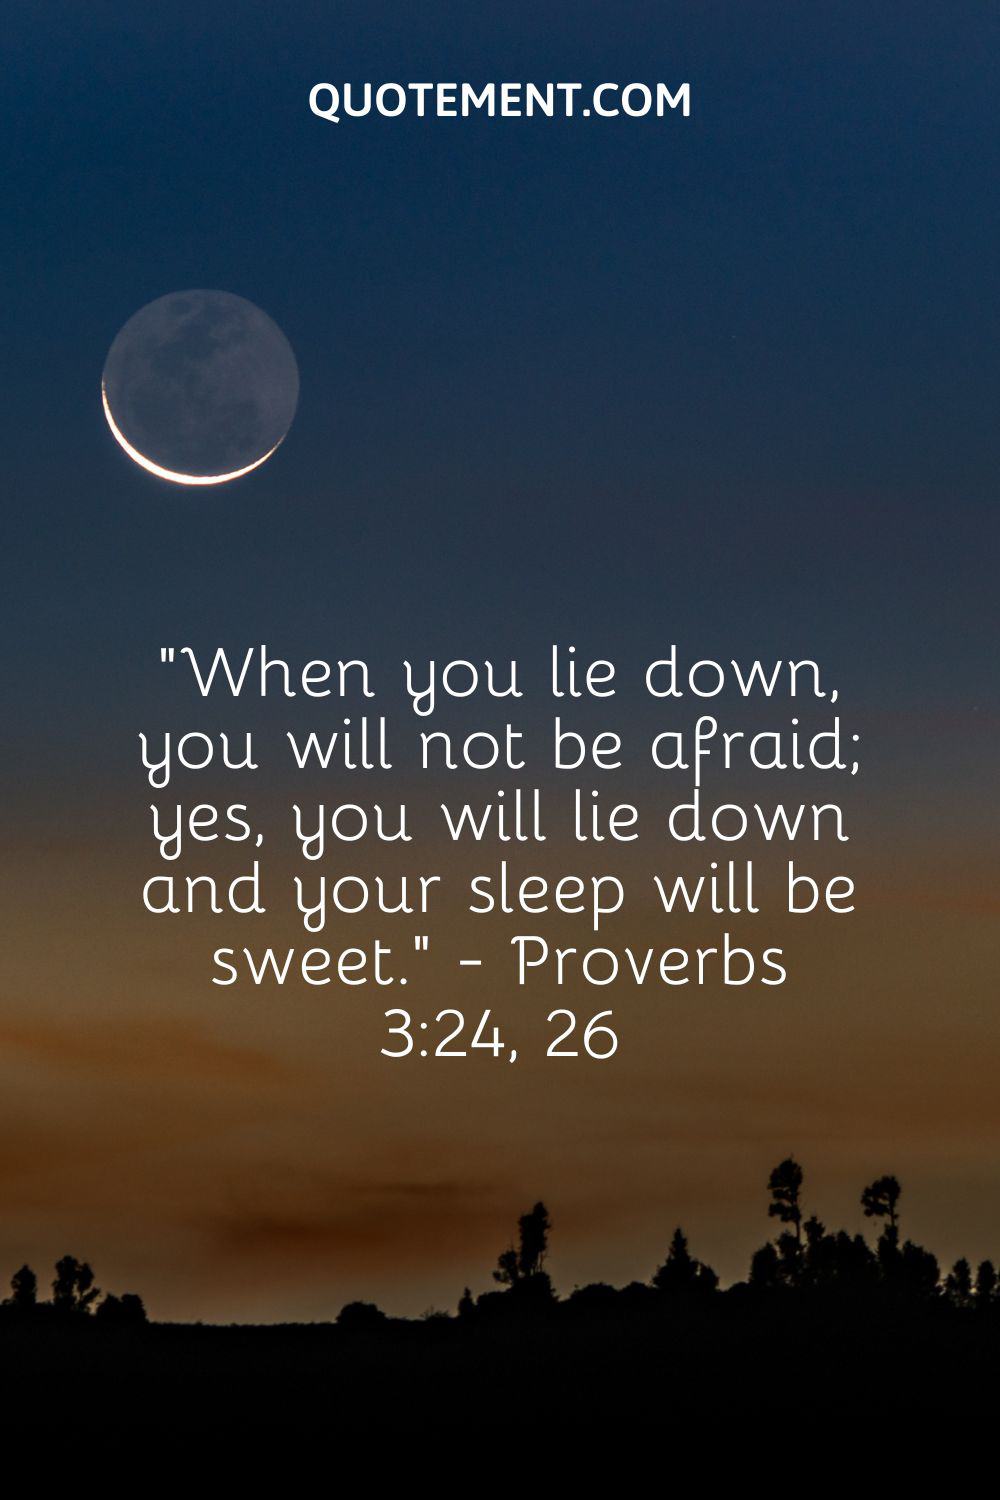 When you lie down, you will not be afraid;